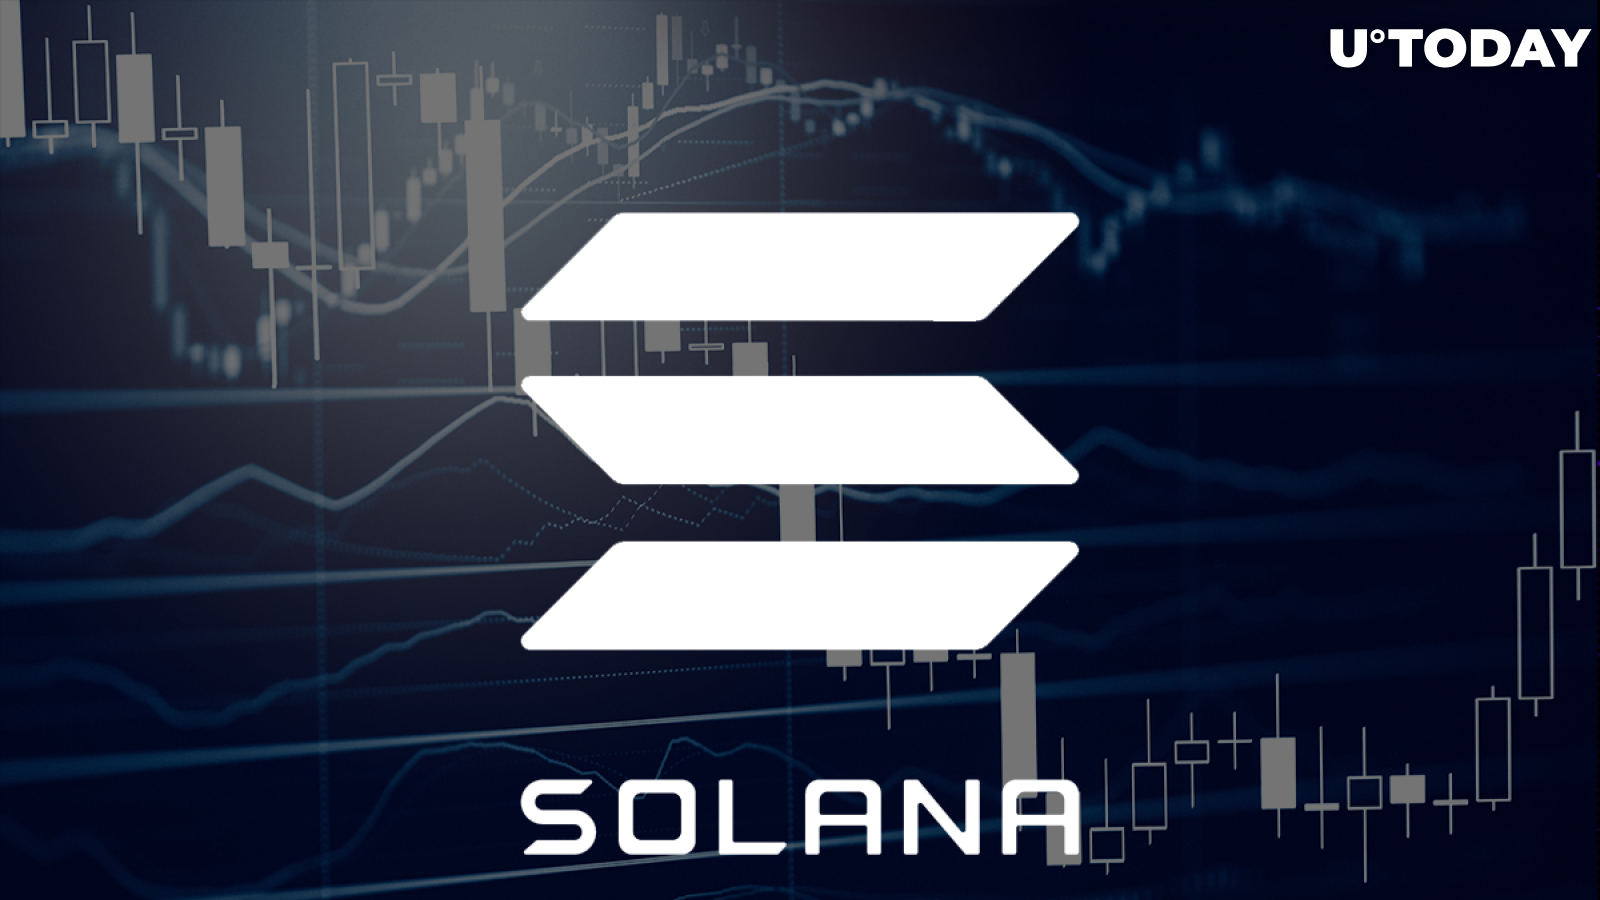 Solana Becoming More Popular with Institutional Investors